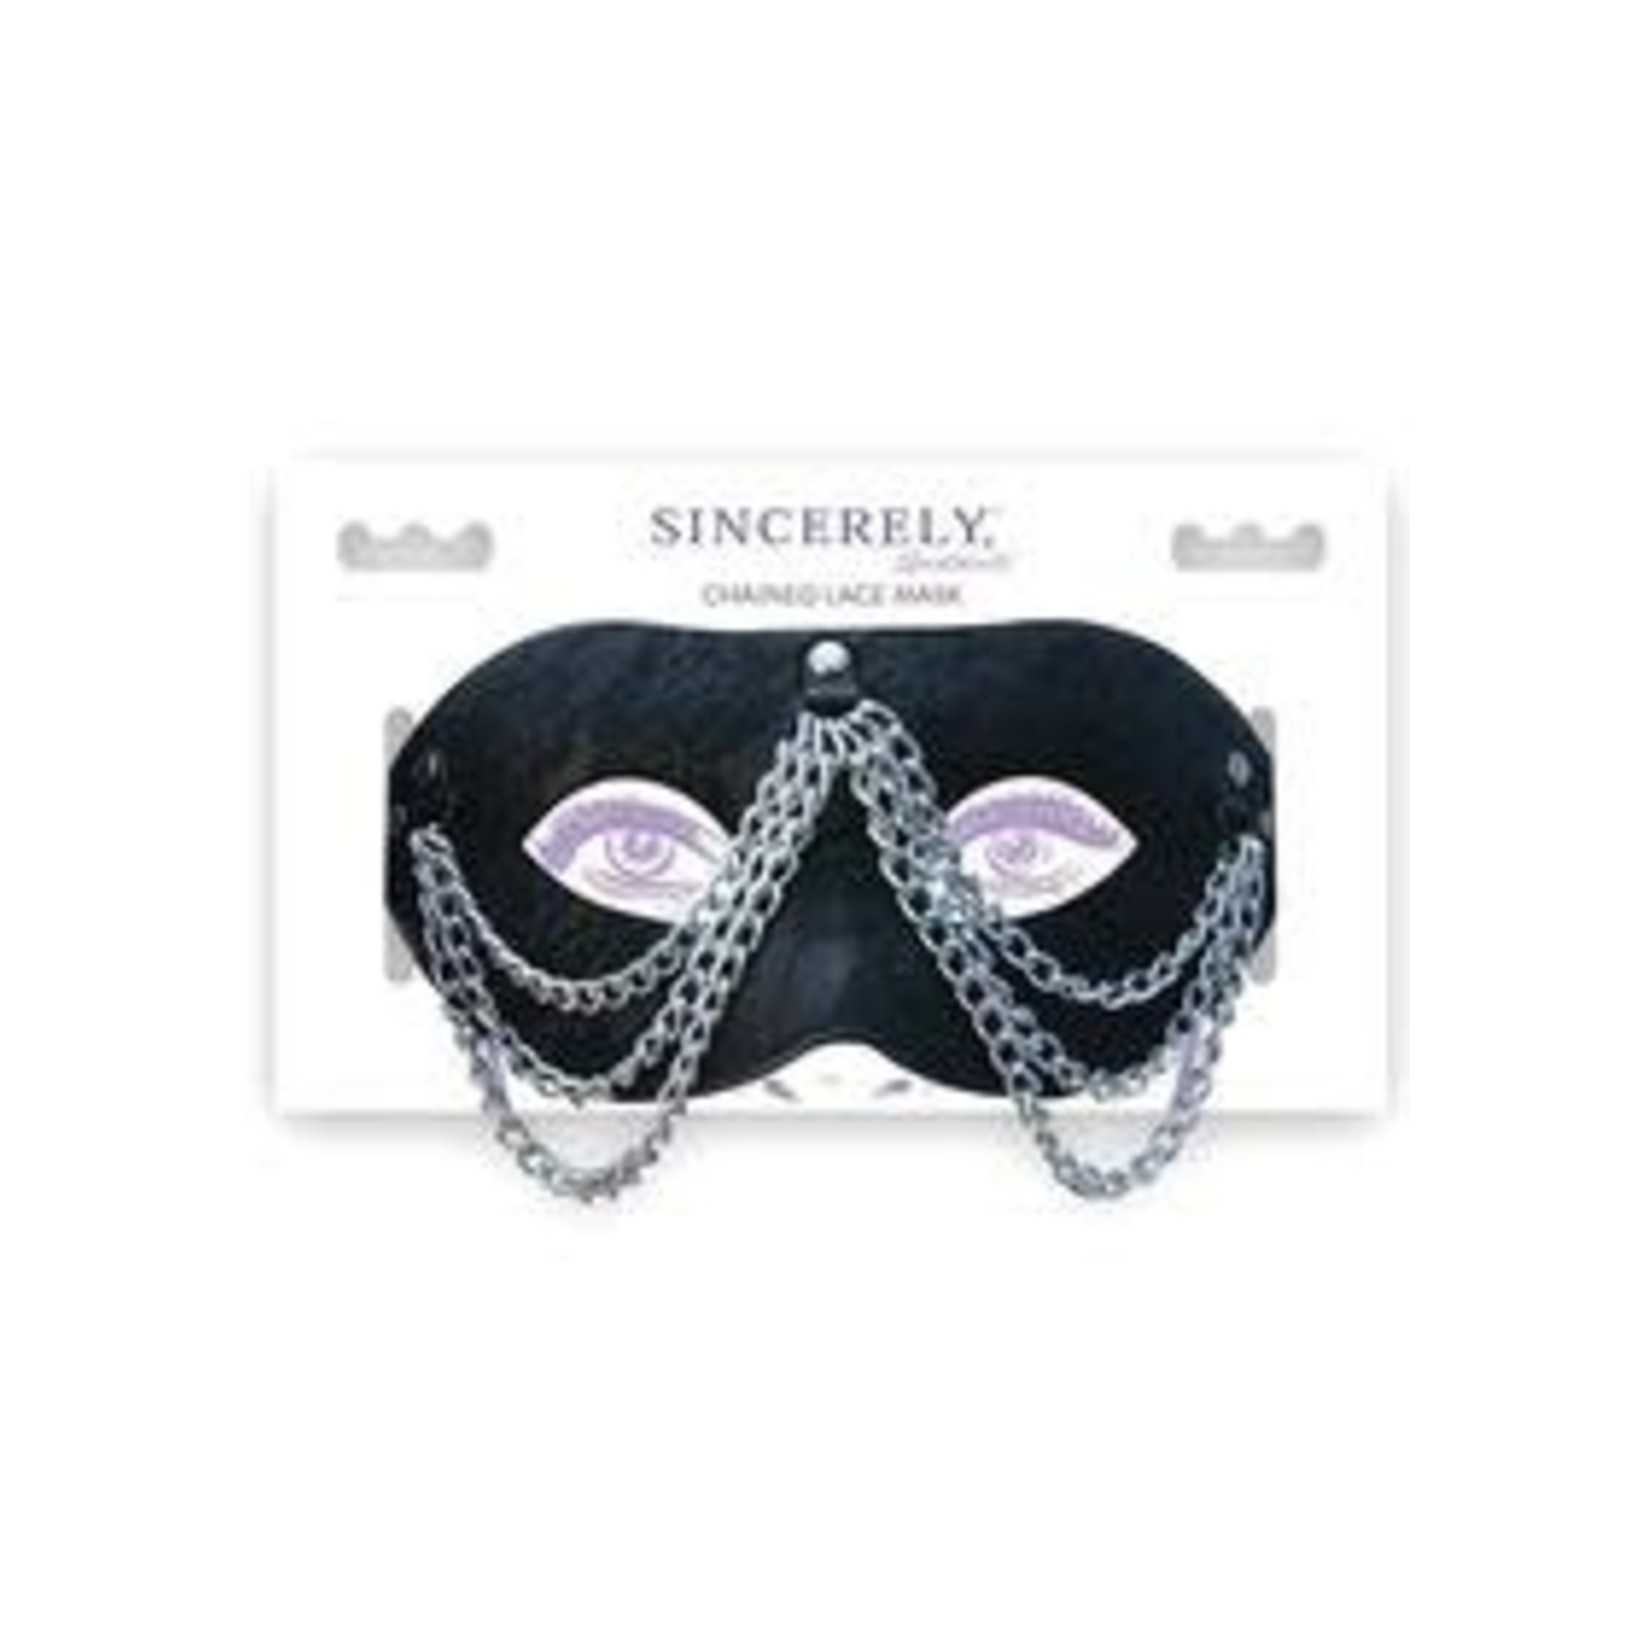 Sincerely Chained Lace Mask - Black